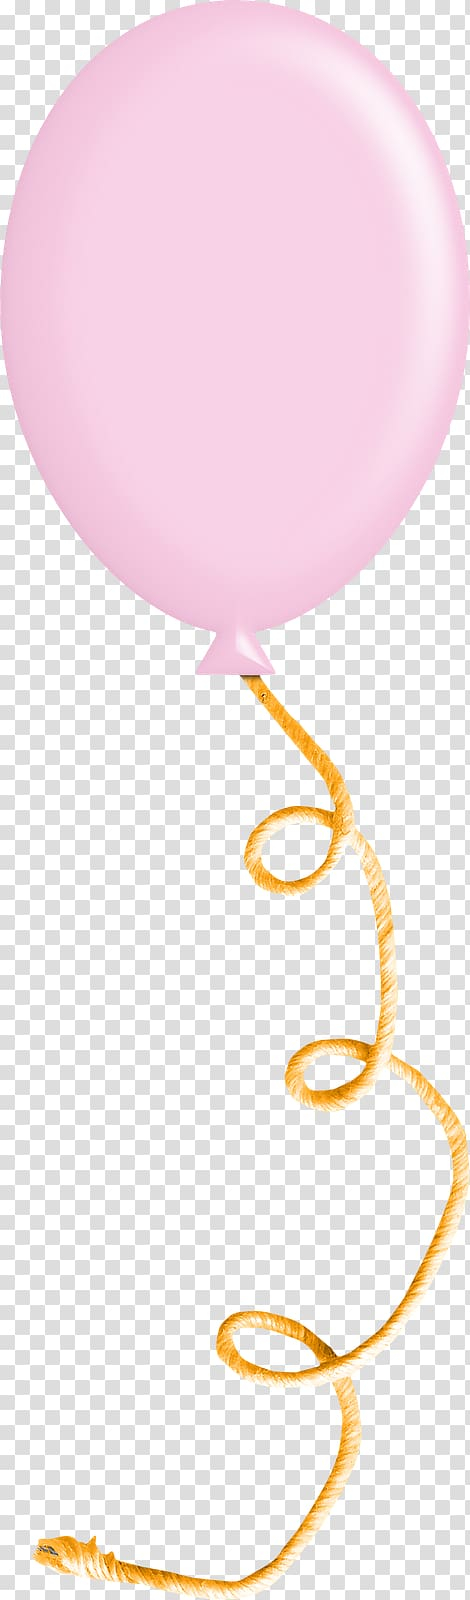 picasa,web,albums,album,holidays,text,happy birthday to you,balloon,typeface,anniversary,pink,line,circle,de,happy,gmail,globo,happy birthday,birthday,picasa web albums,party,drawing,png clipart,free png,transparent background,free clipart,clip art,free download,png,comhiclipart